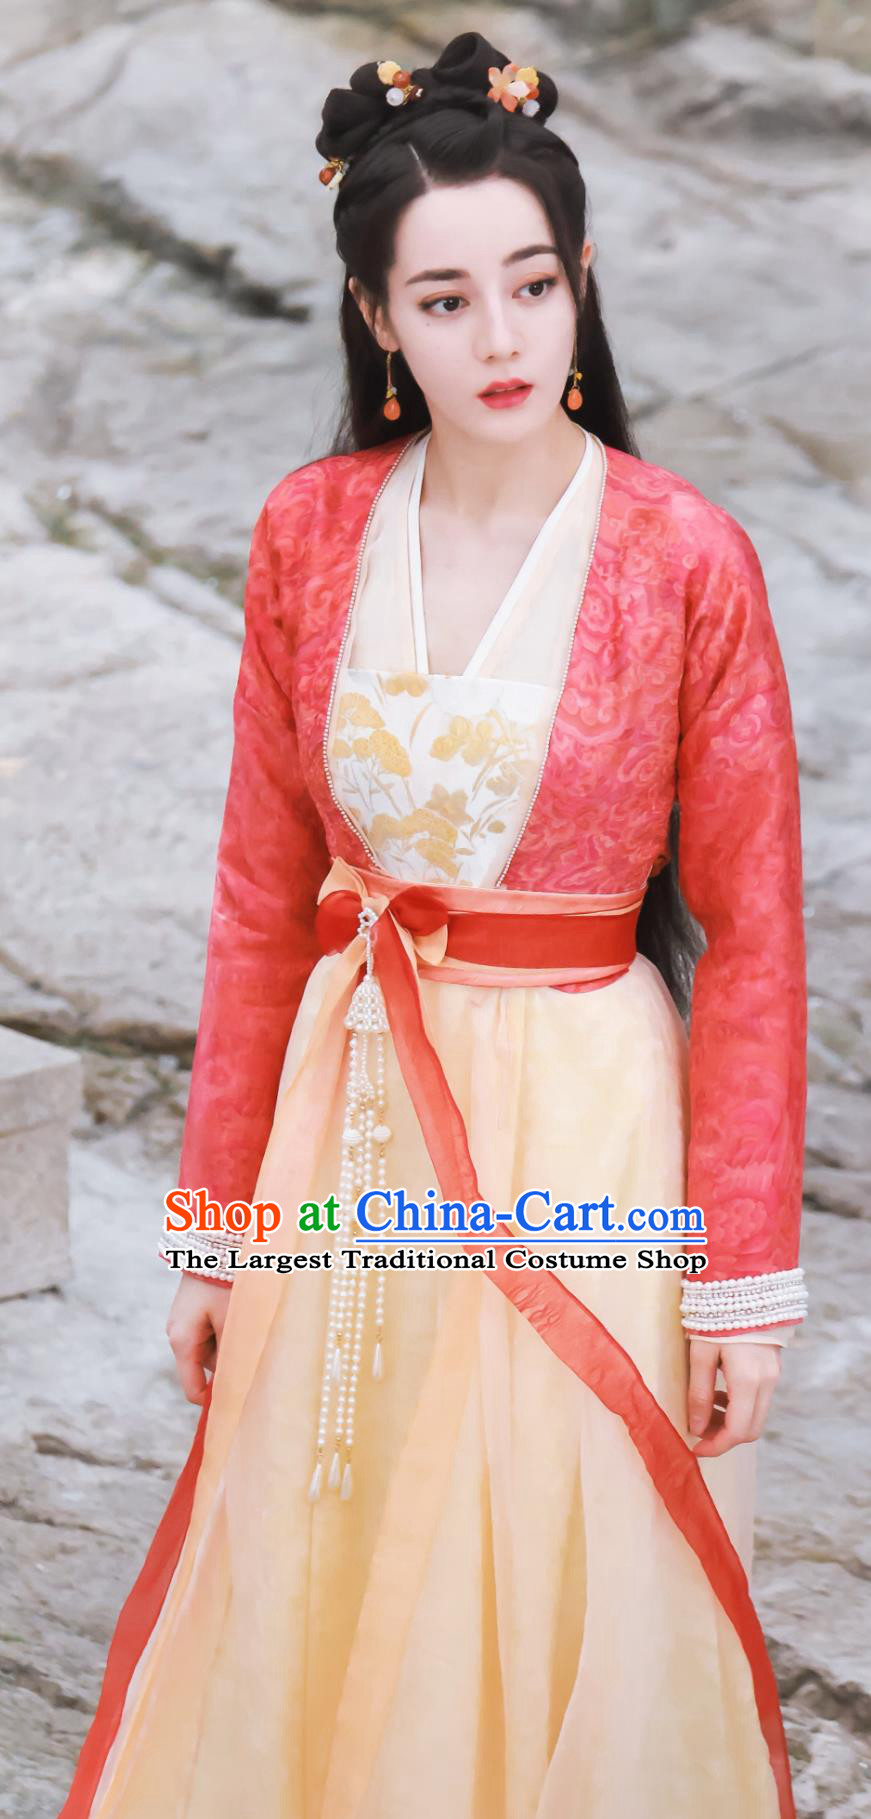 Ancient China Swordswoman Clothing Traditional Woman Hanfu TV Series The Legend of An Le Heroine Ren An Le Dress